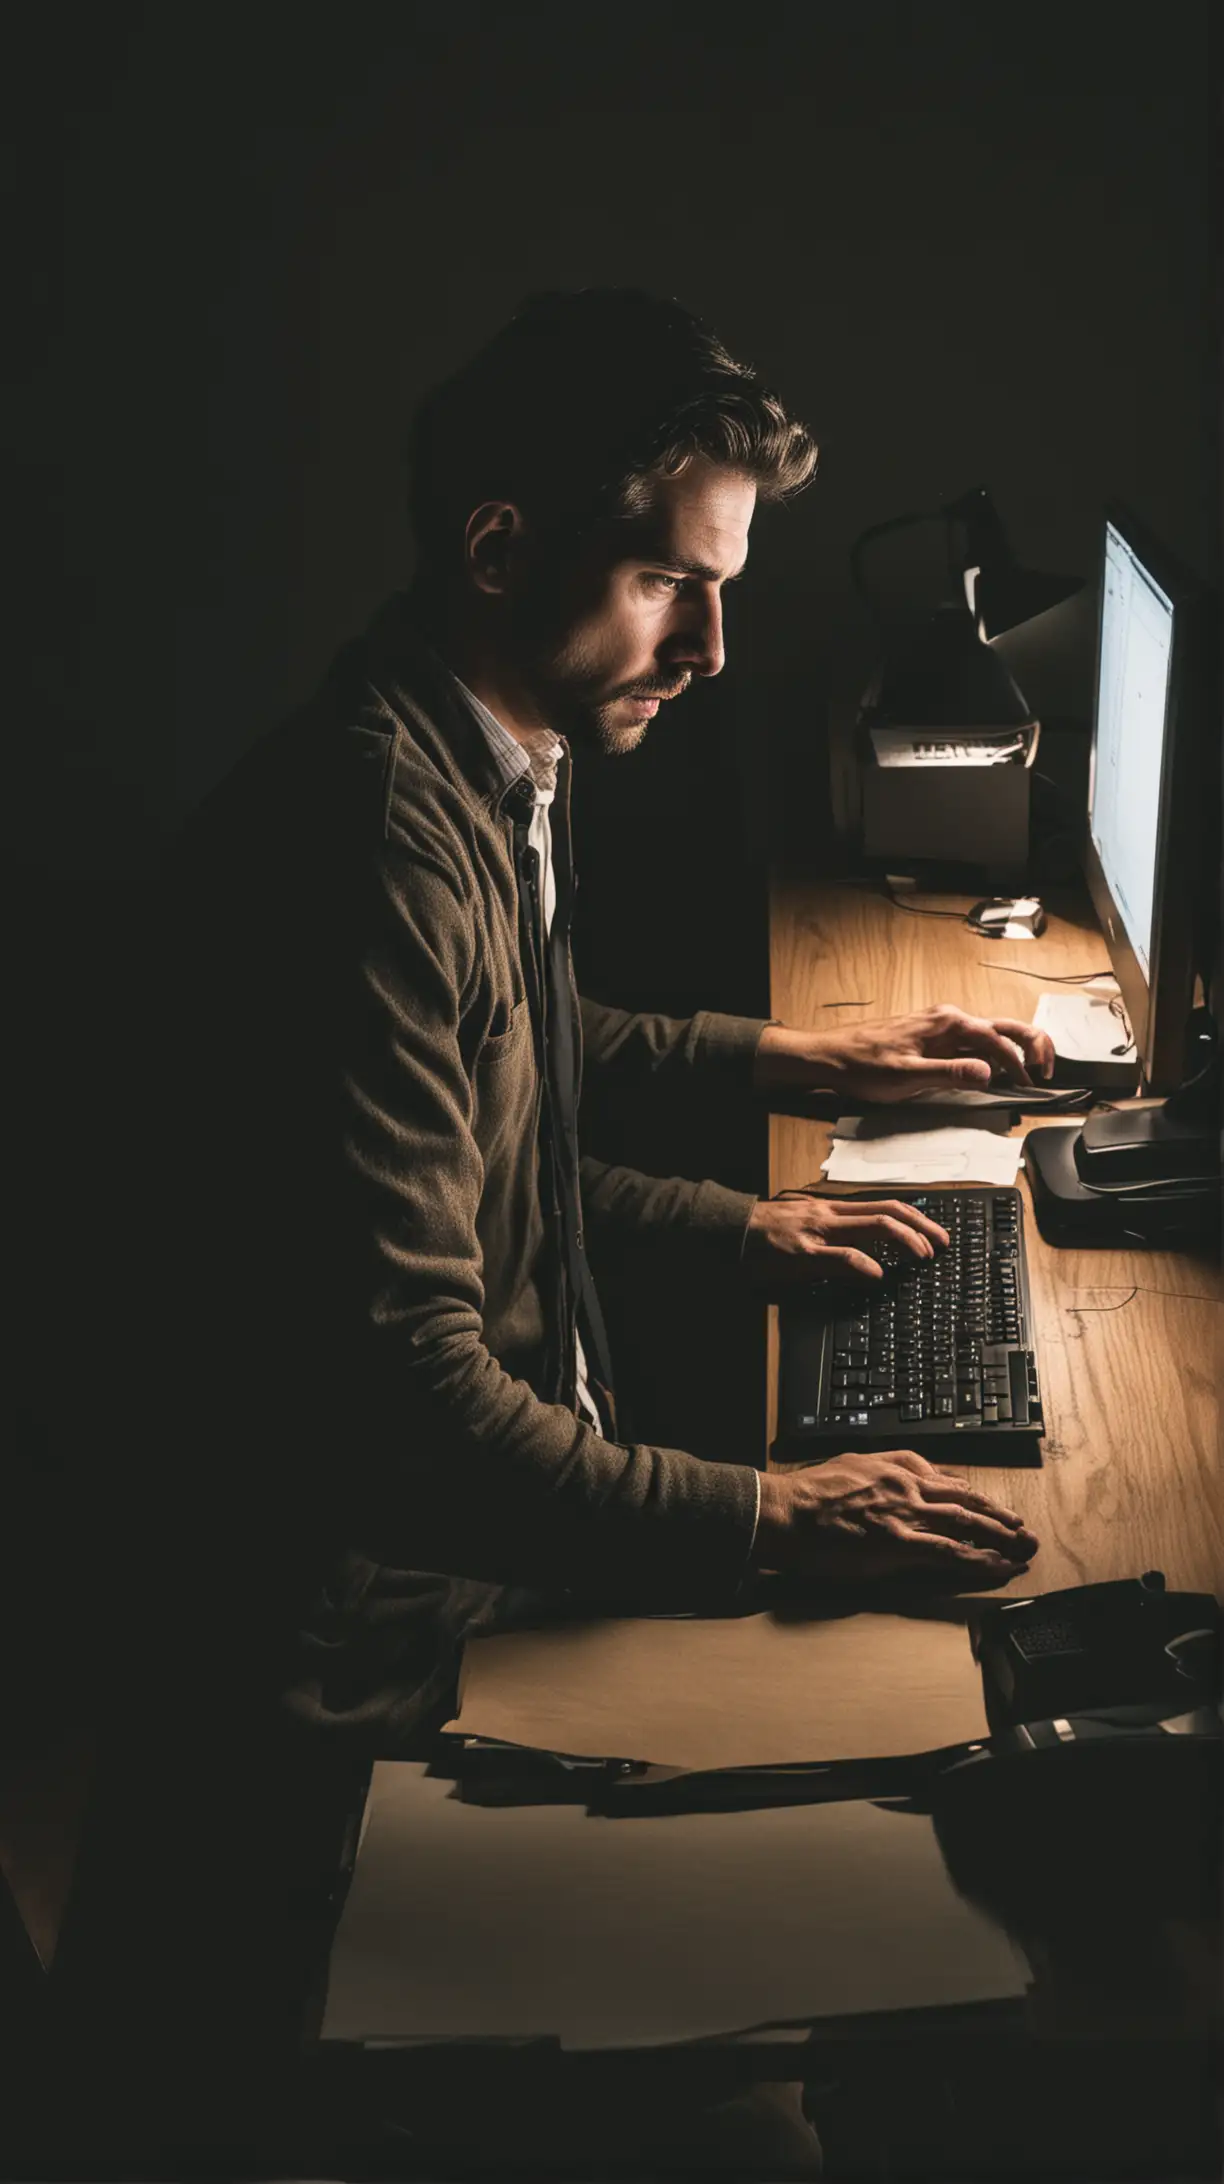 Focused Man Working Late on Computer in Dimly Lit Office